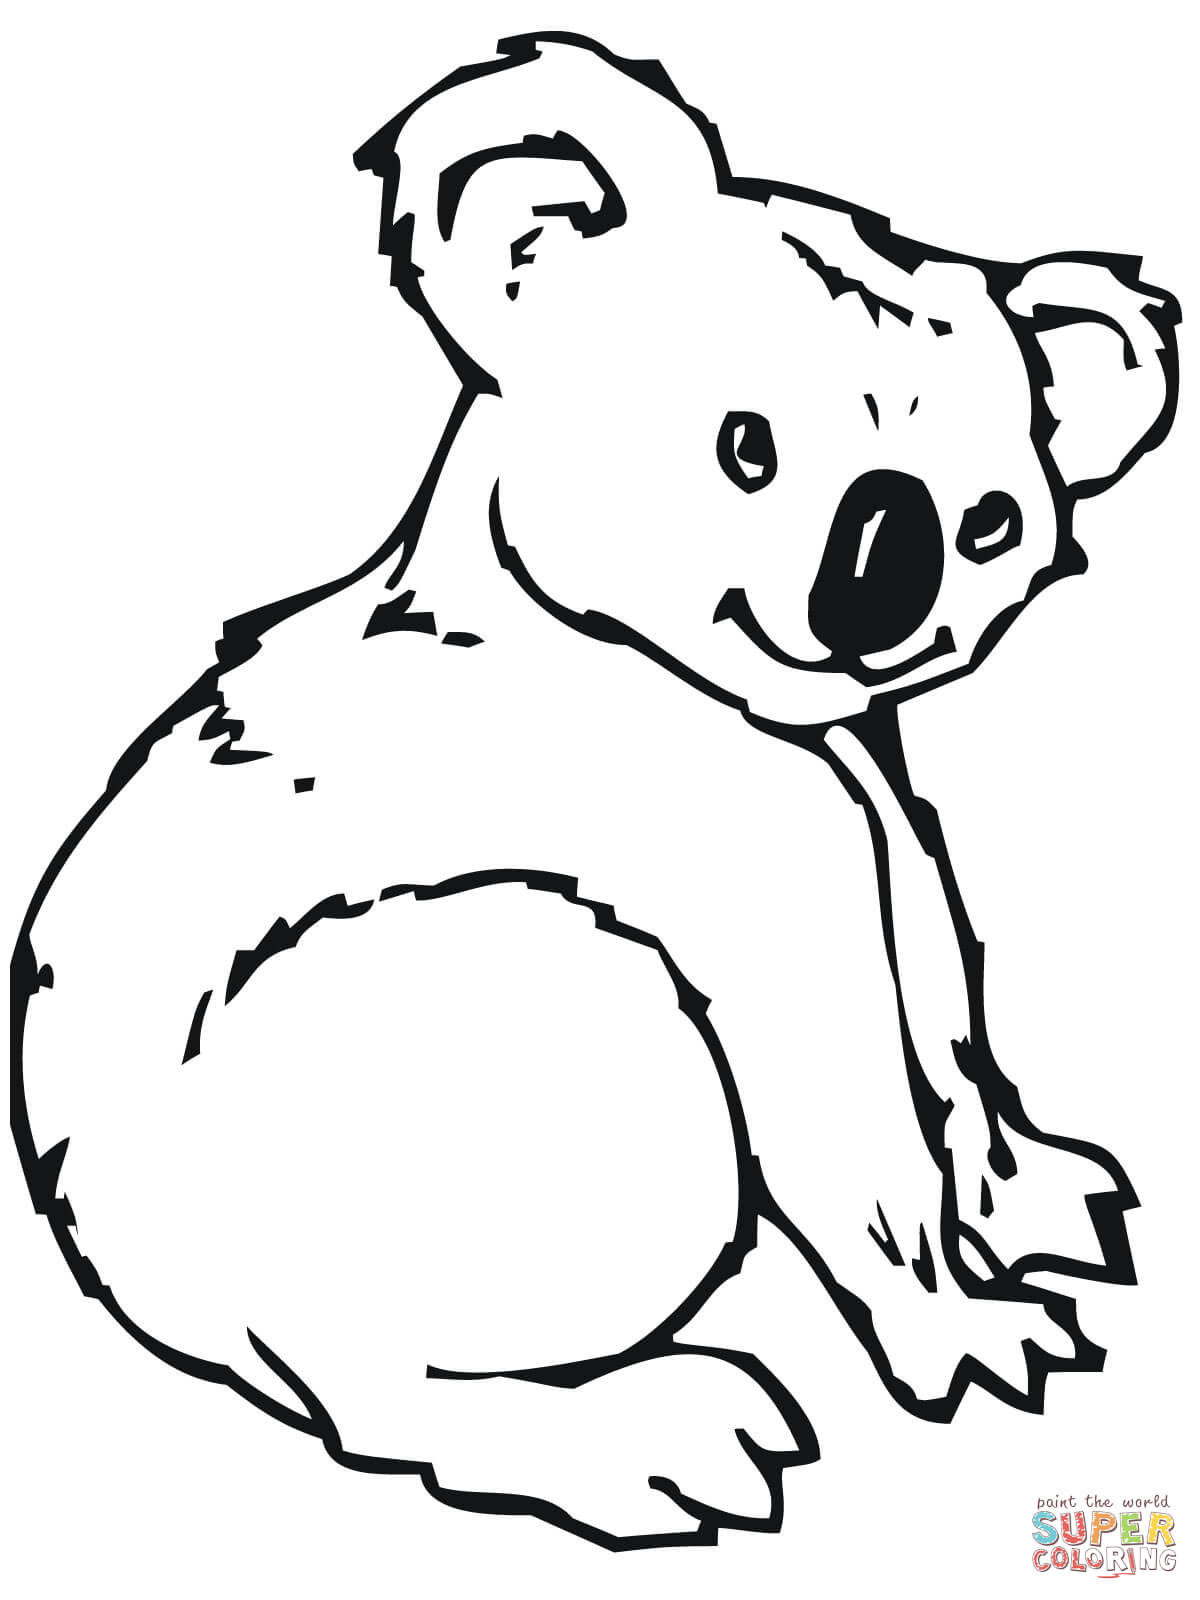 Koala coloring pages to download and print for free